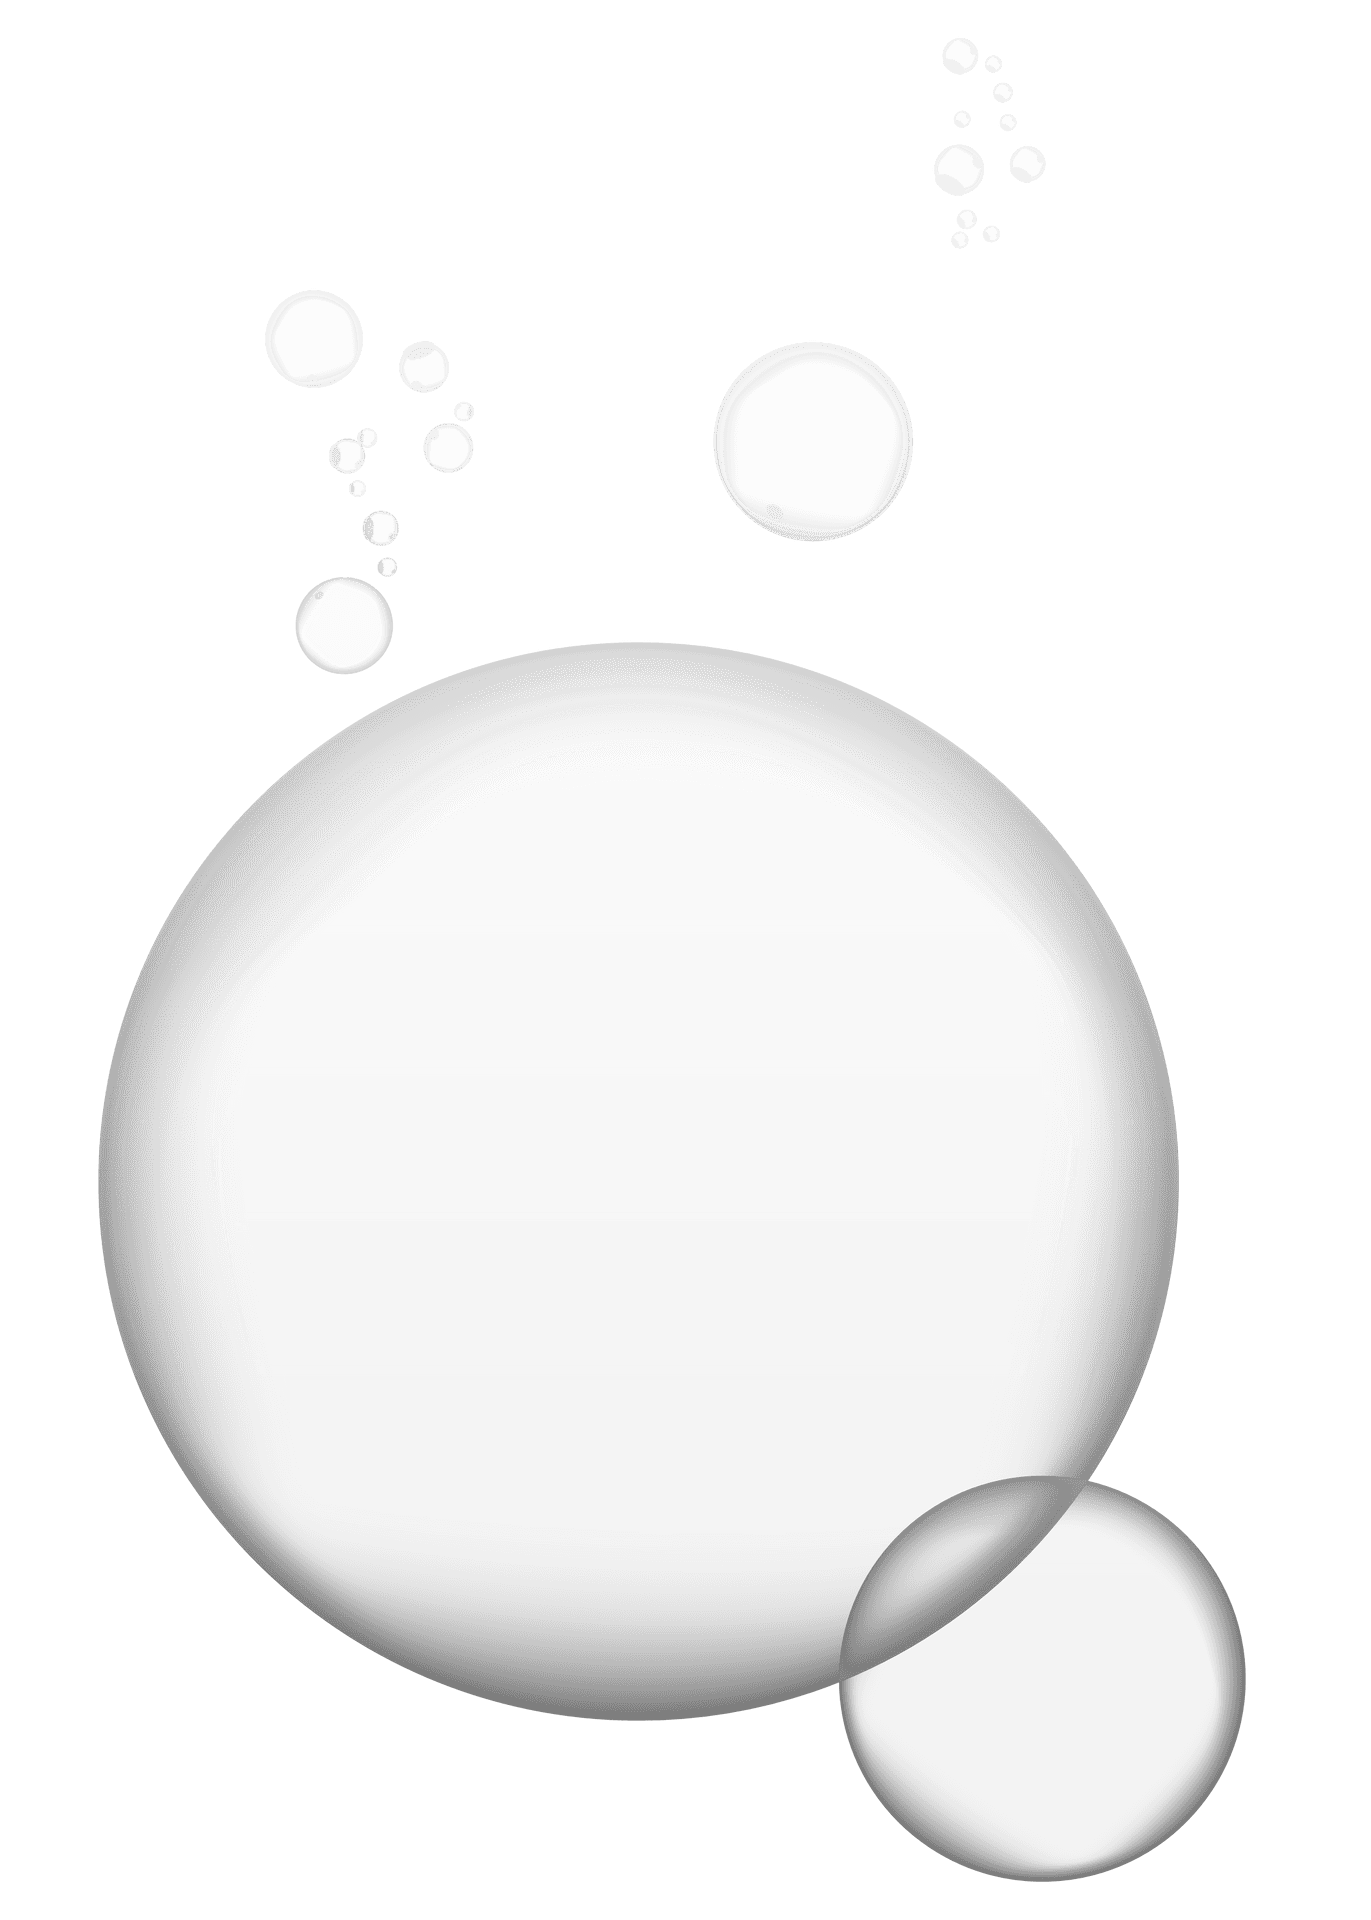 Abstract Bubbles Design PNG image